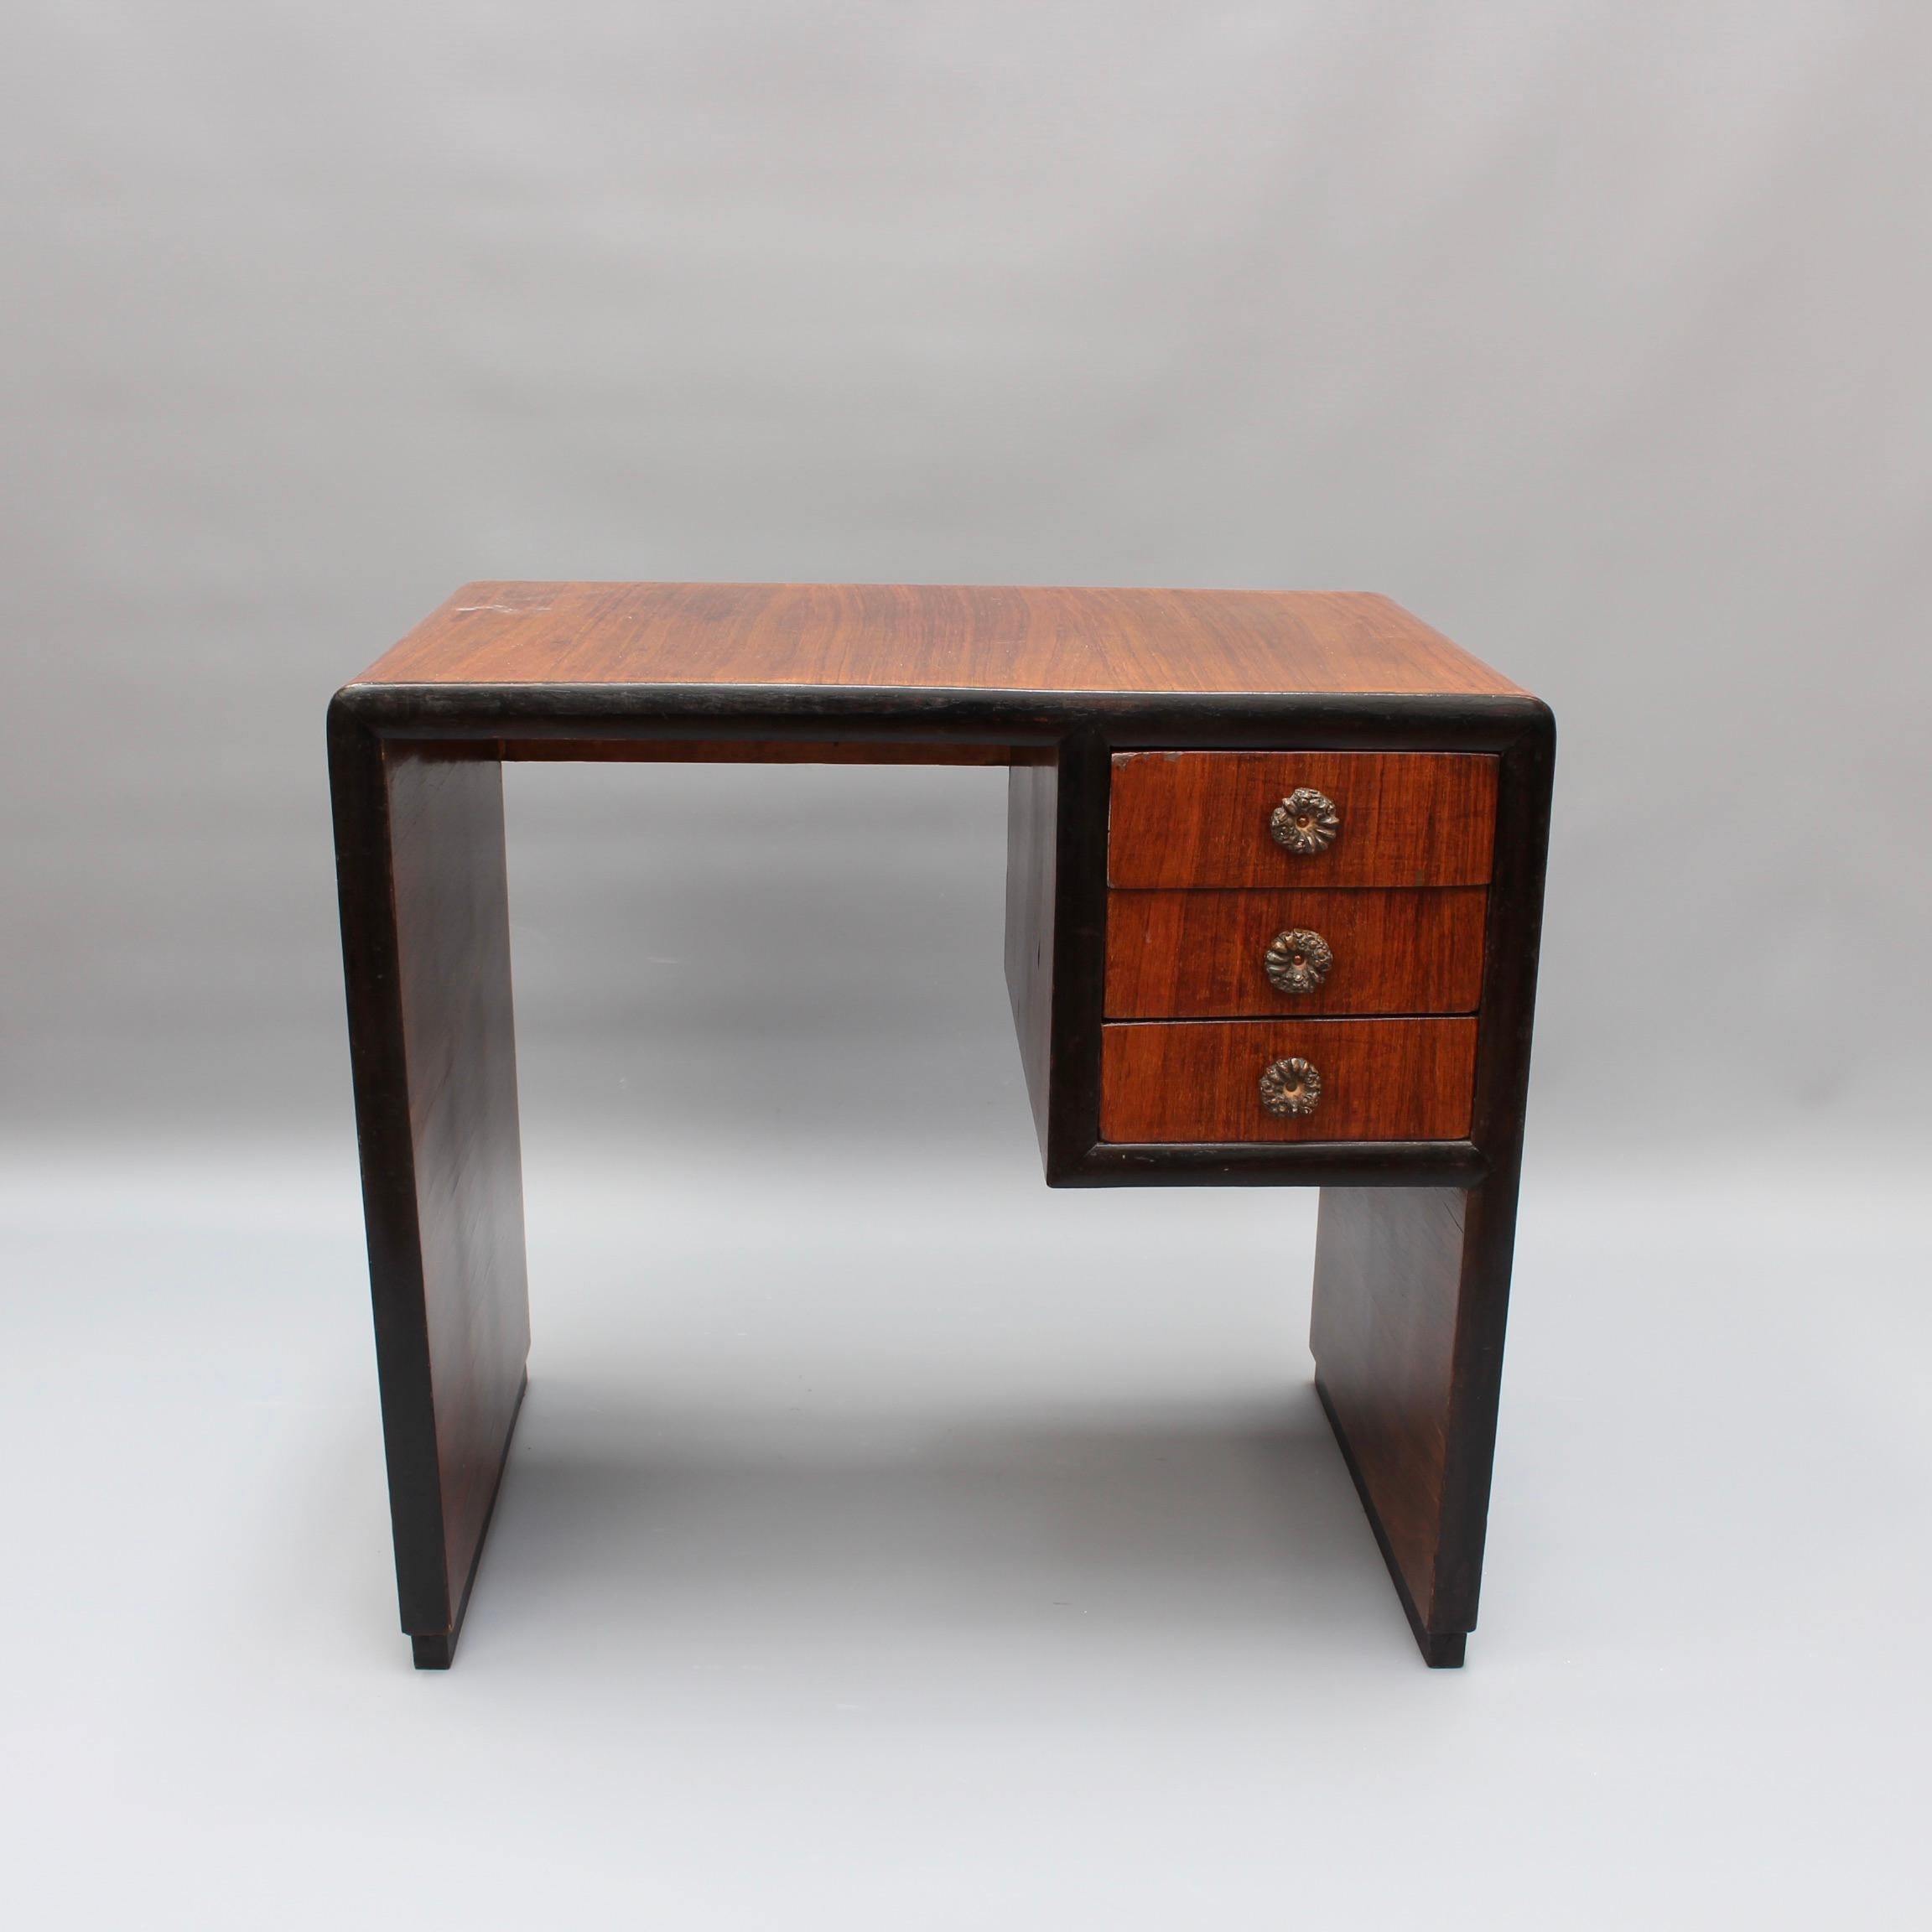 20th century Italian wooden desk, (circa 1970s). A square-edged arched shape with three drawers form the structural outline of this charming wooden desk. Originally custom-created for a small Italian village's boutique Art Deco hotel it has been